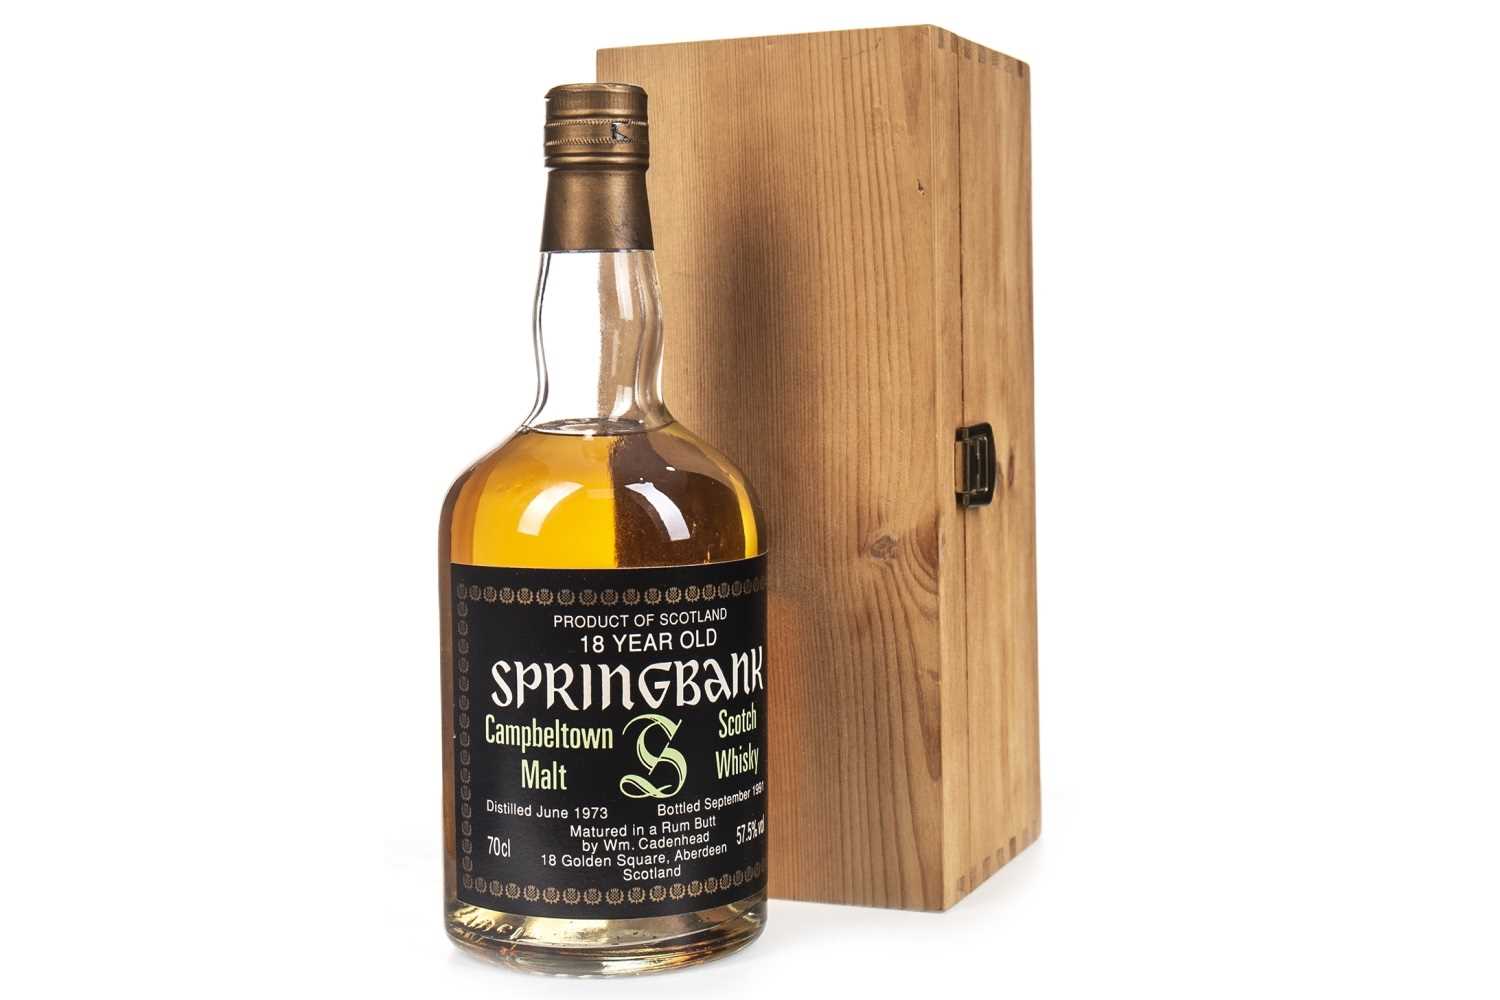 Lot 245 - SPRINGBANK 1973 RUM BUTT AGED 18 YEARS